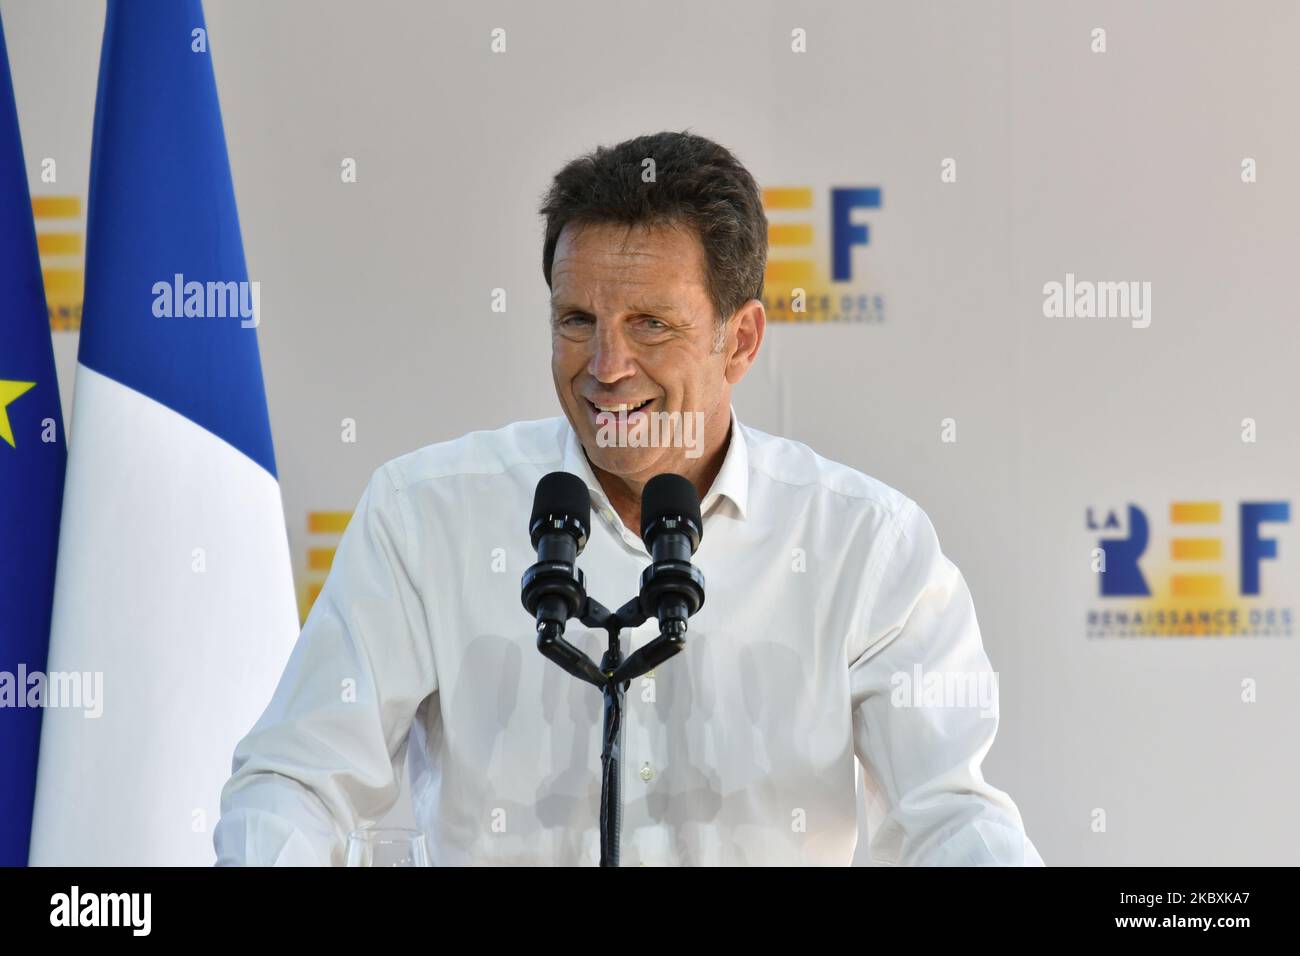 Medef President Geoffroy Roux de Bezieux delivers the openning speech at the meeting of French employers' association Medef themed 'The Renaissance of French Companies' on August 26, 2020, in Paris, France. (Photo by Daniel Pier/NurPhoto) Stock Photo